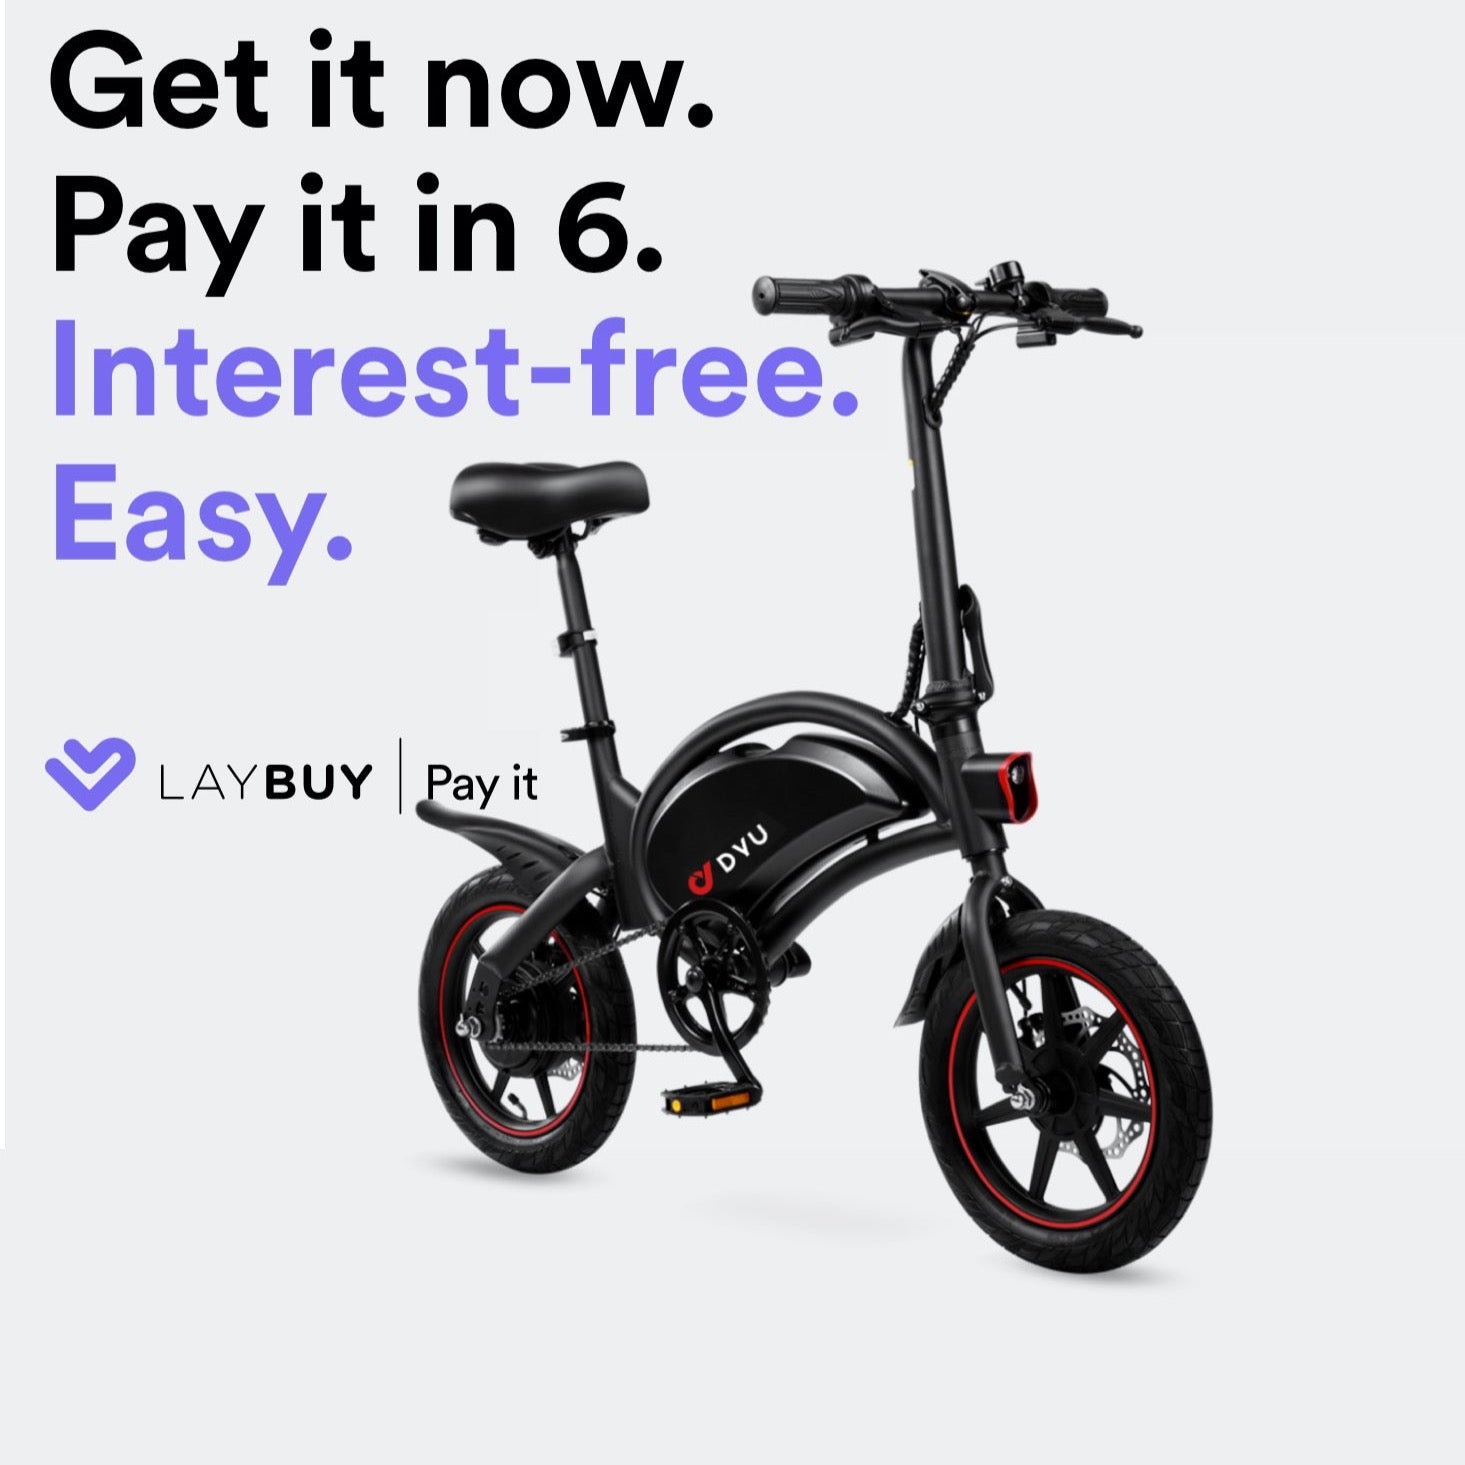 Pay The DYU D3F Ebike In 6 Interest-Free Payments